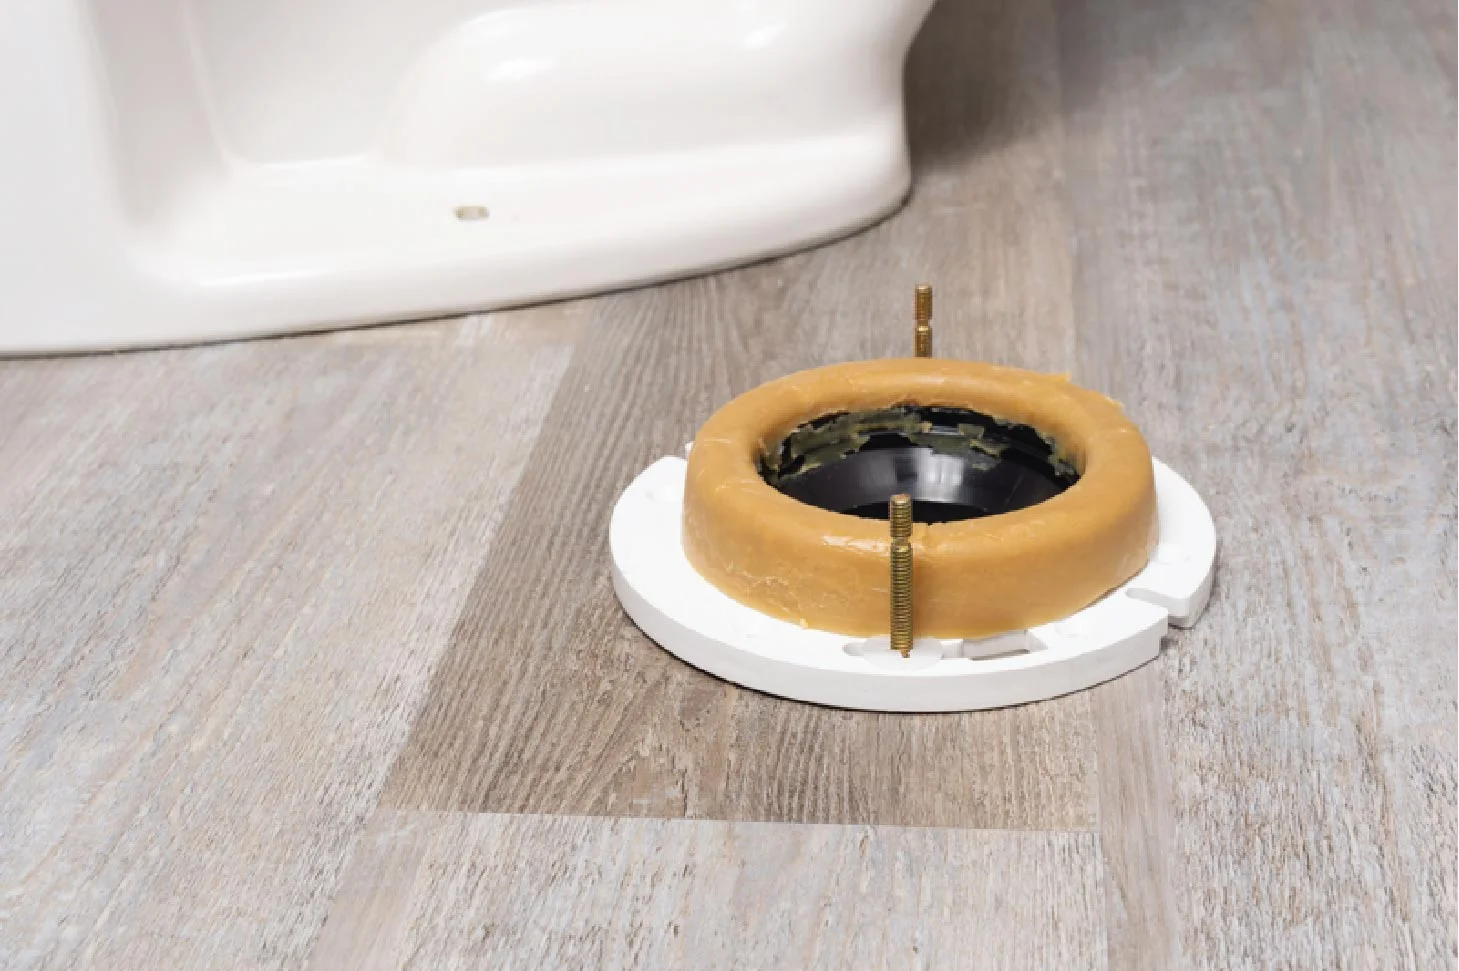  How To Install A Toilet Flange